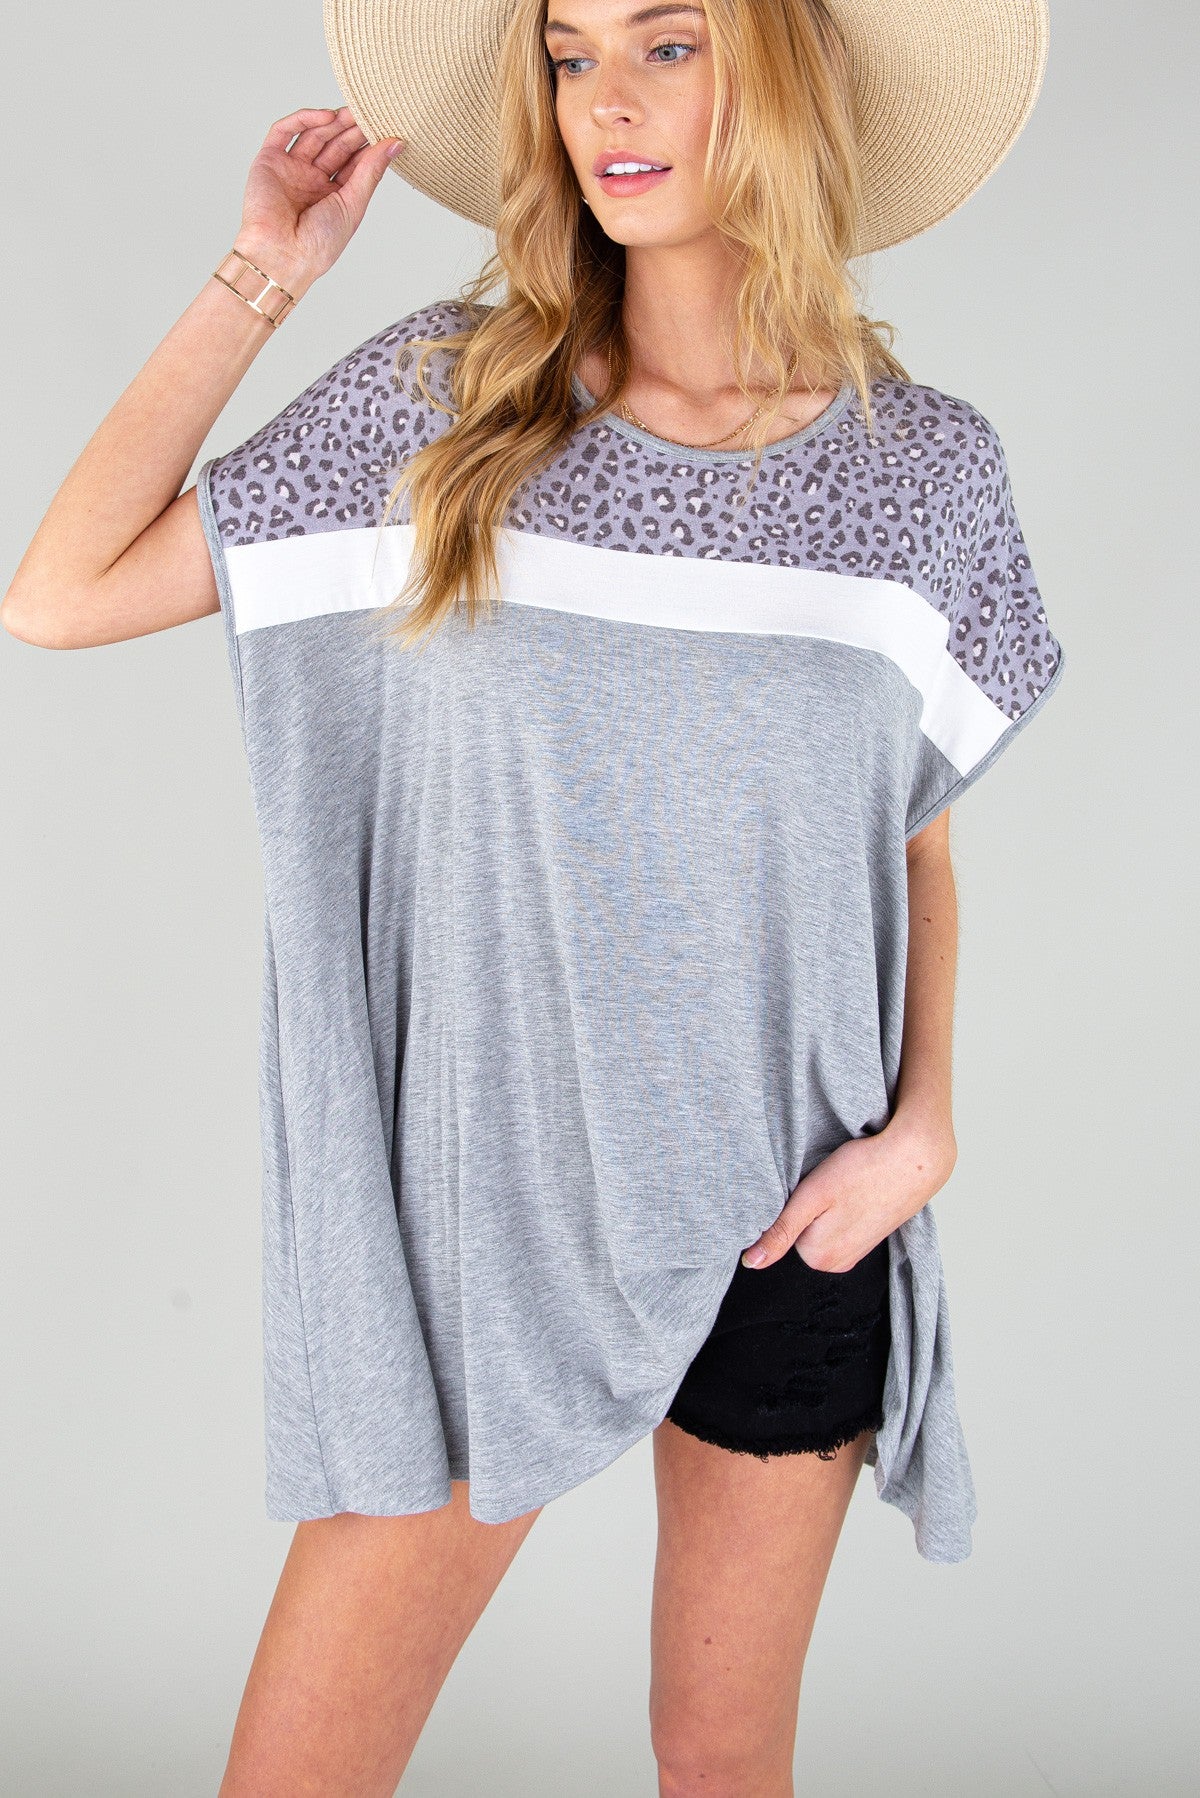 Matching MaMa-Auntie Short Sleeve Leopard Color Block Loose A-line Top